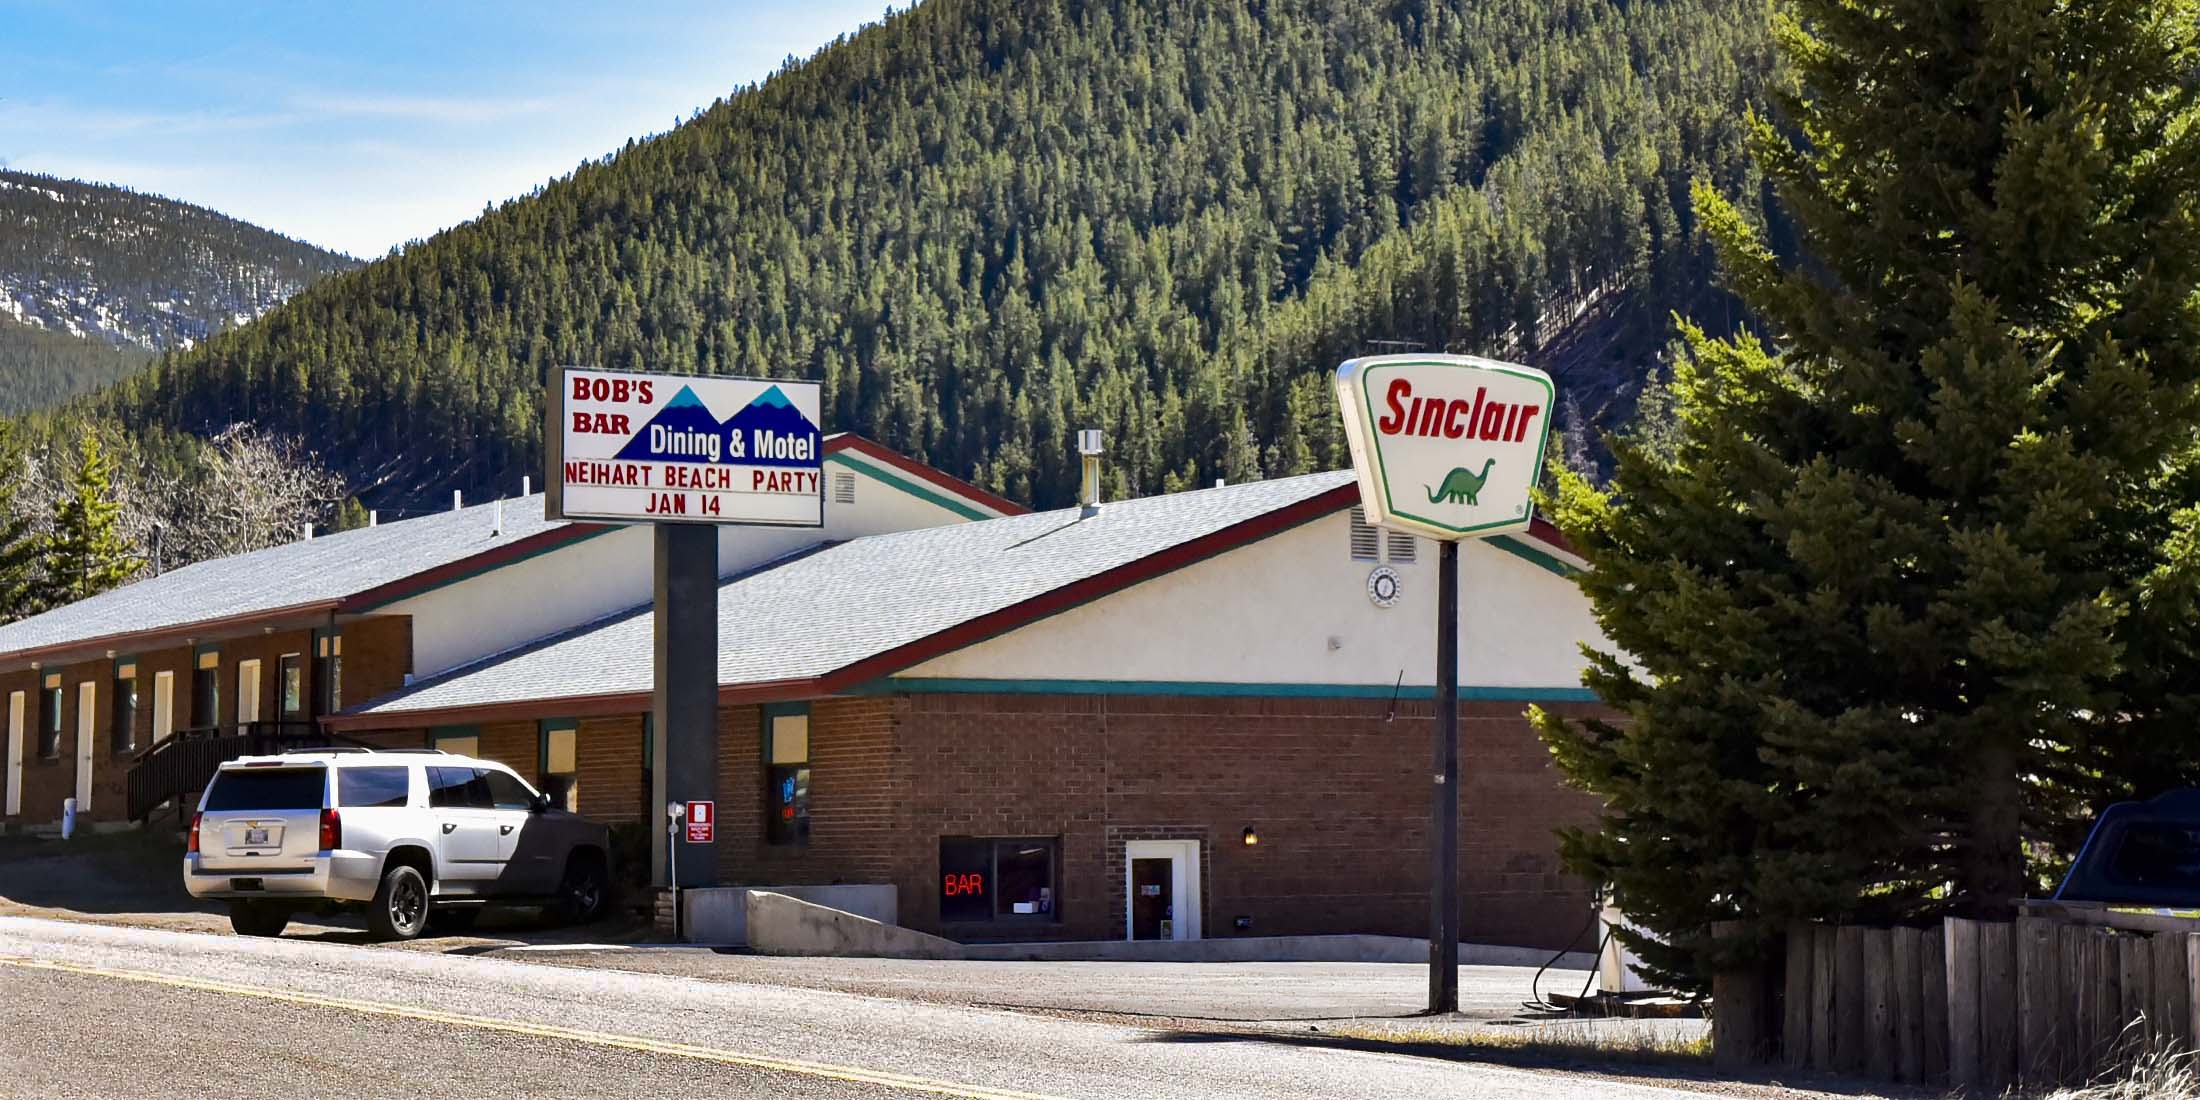 Bob's Bar has motel rooms, and also a restaurant with a full bar. Located in Neihart, Montana along Highway 89.